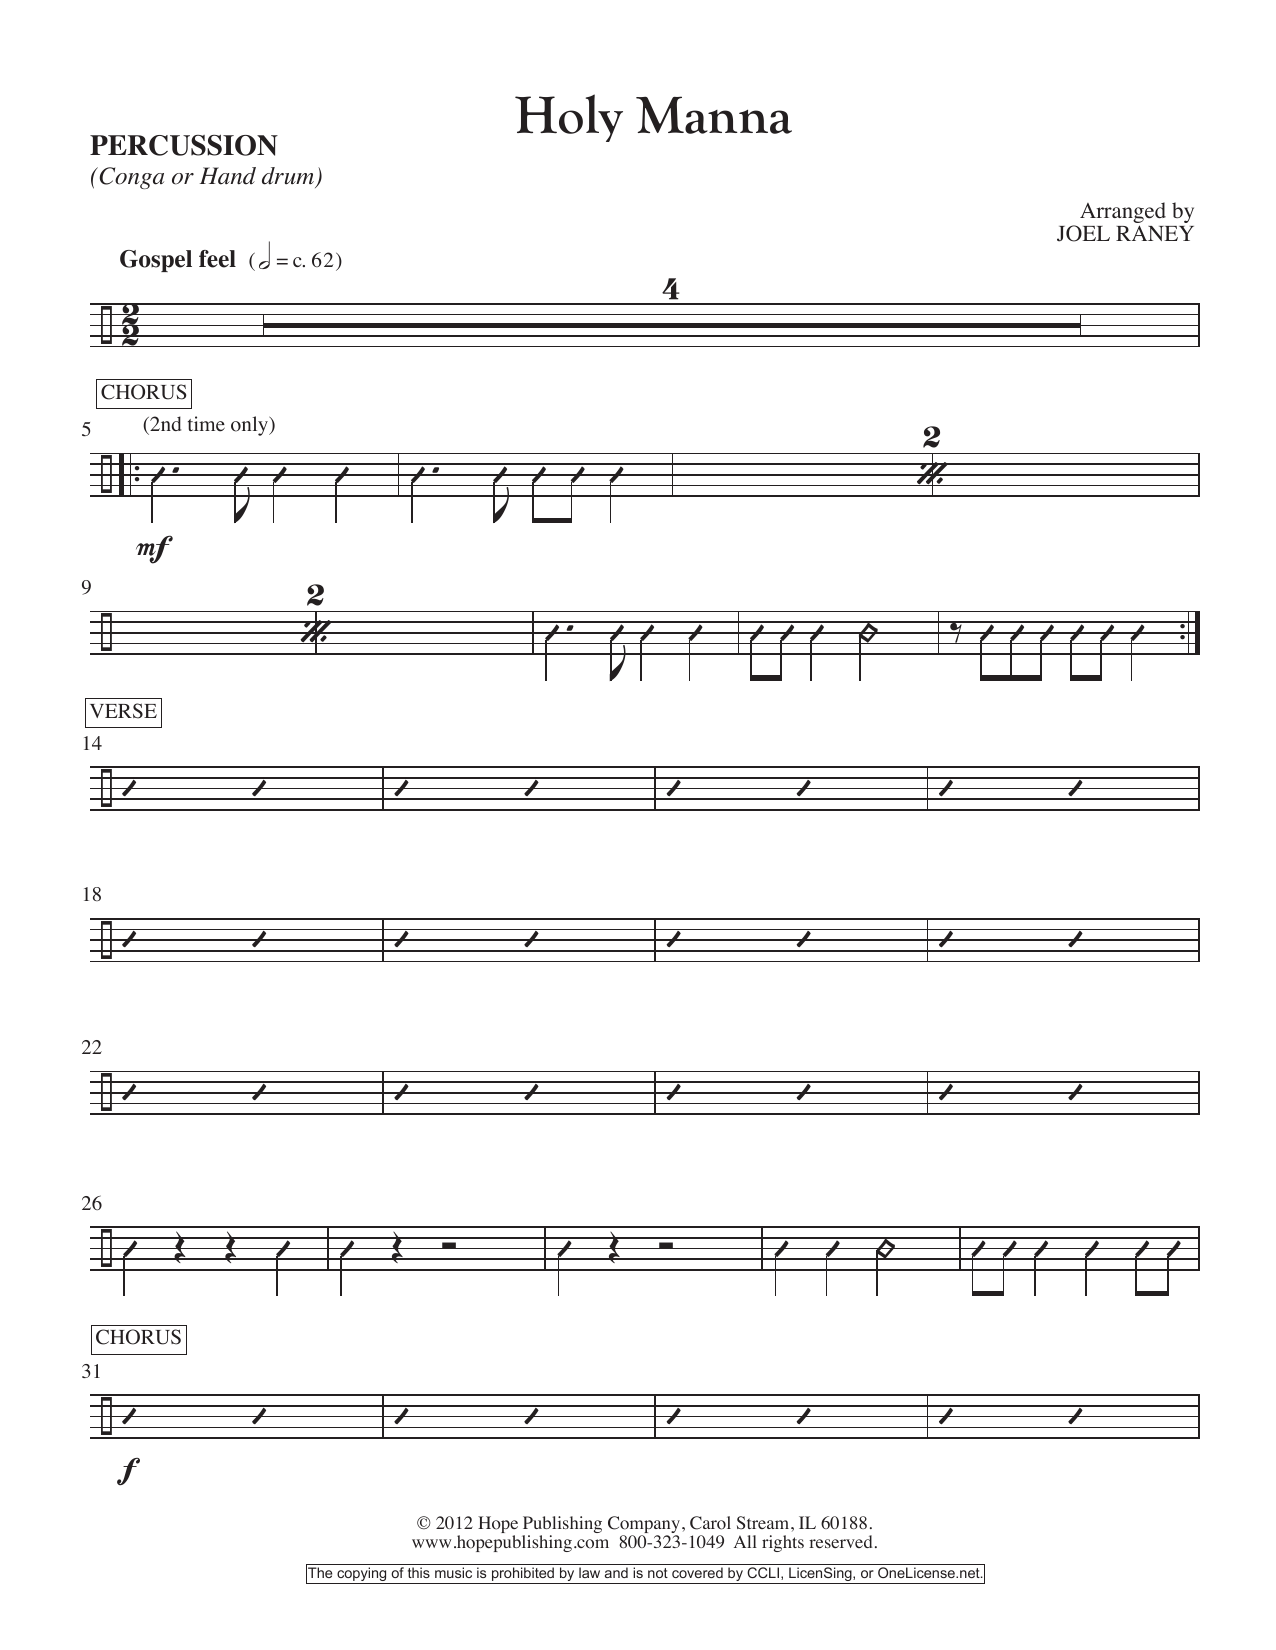 Download Joel Raney Holy Manna - Percussion Sheet Music